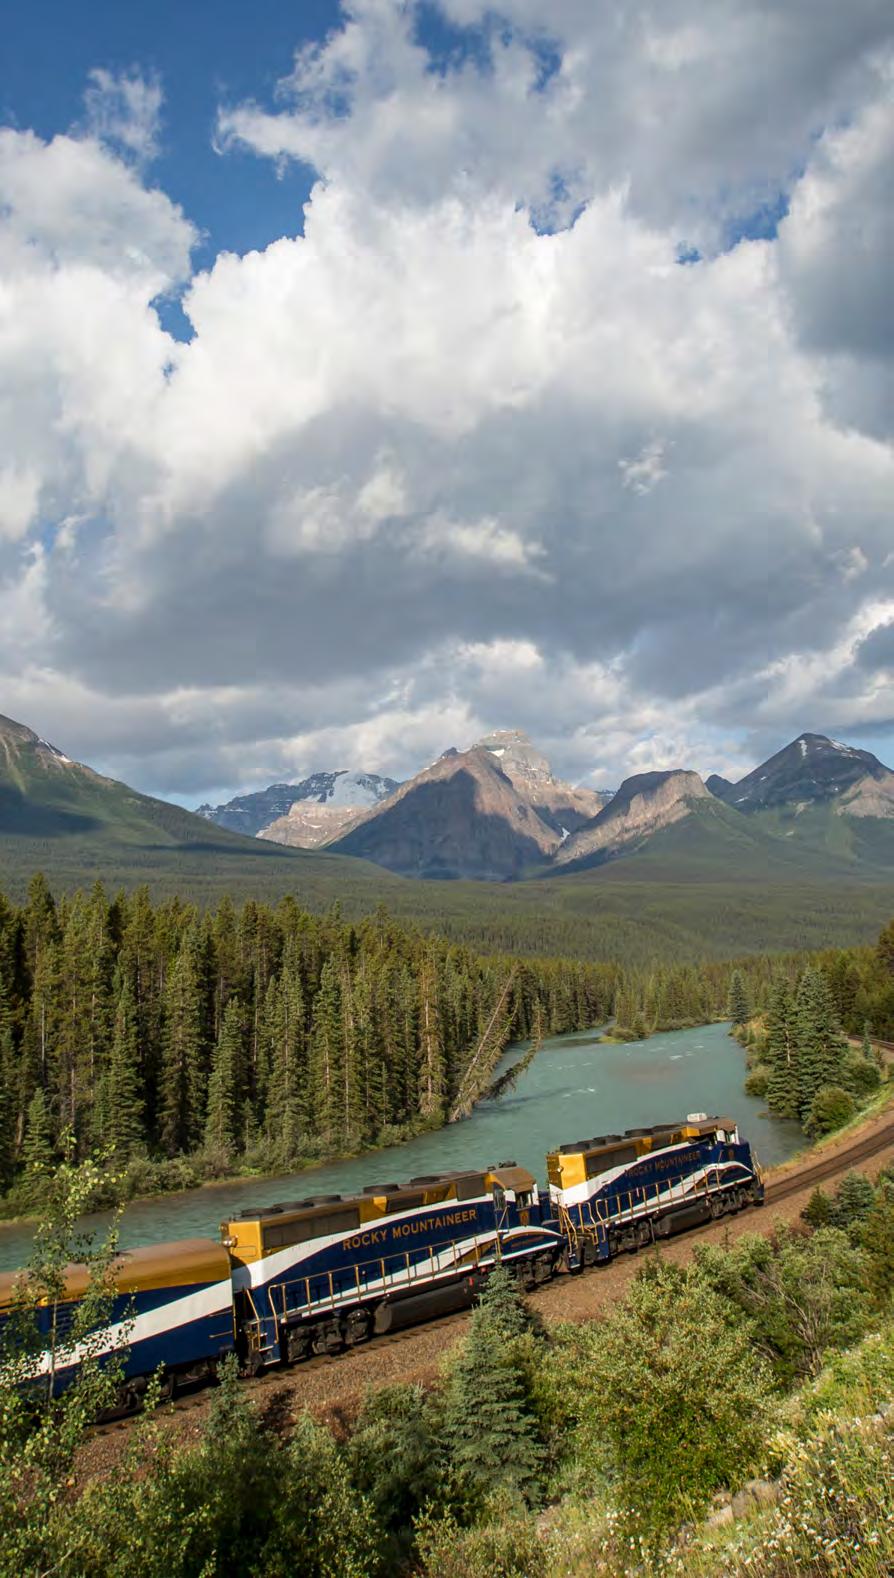 Head north to experience the humbling proportions and famed beauty of the Canadian Rockies.